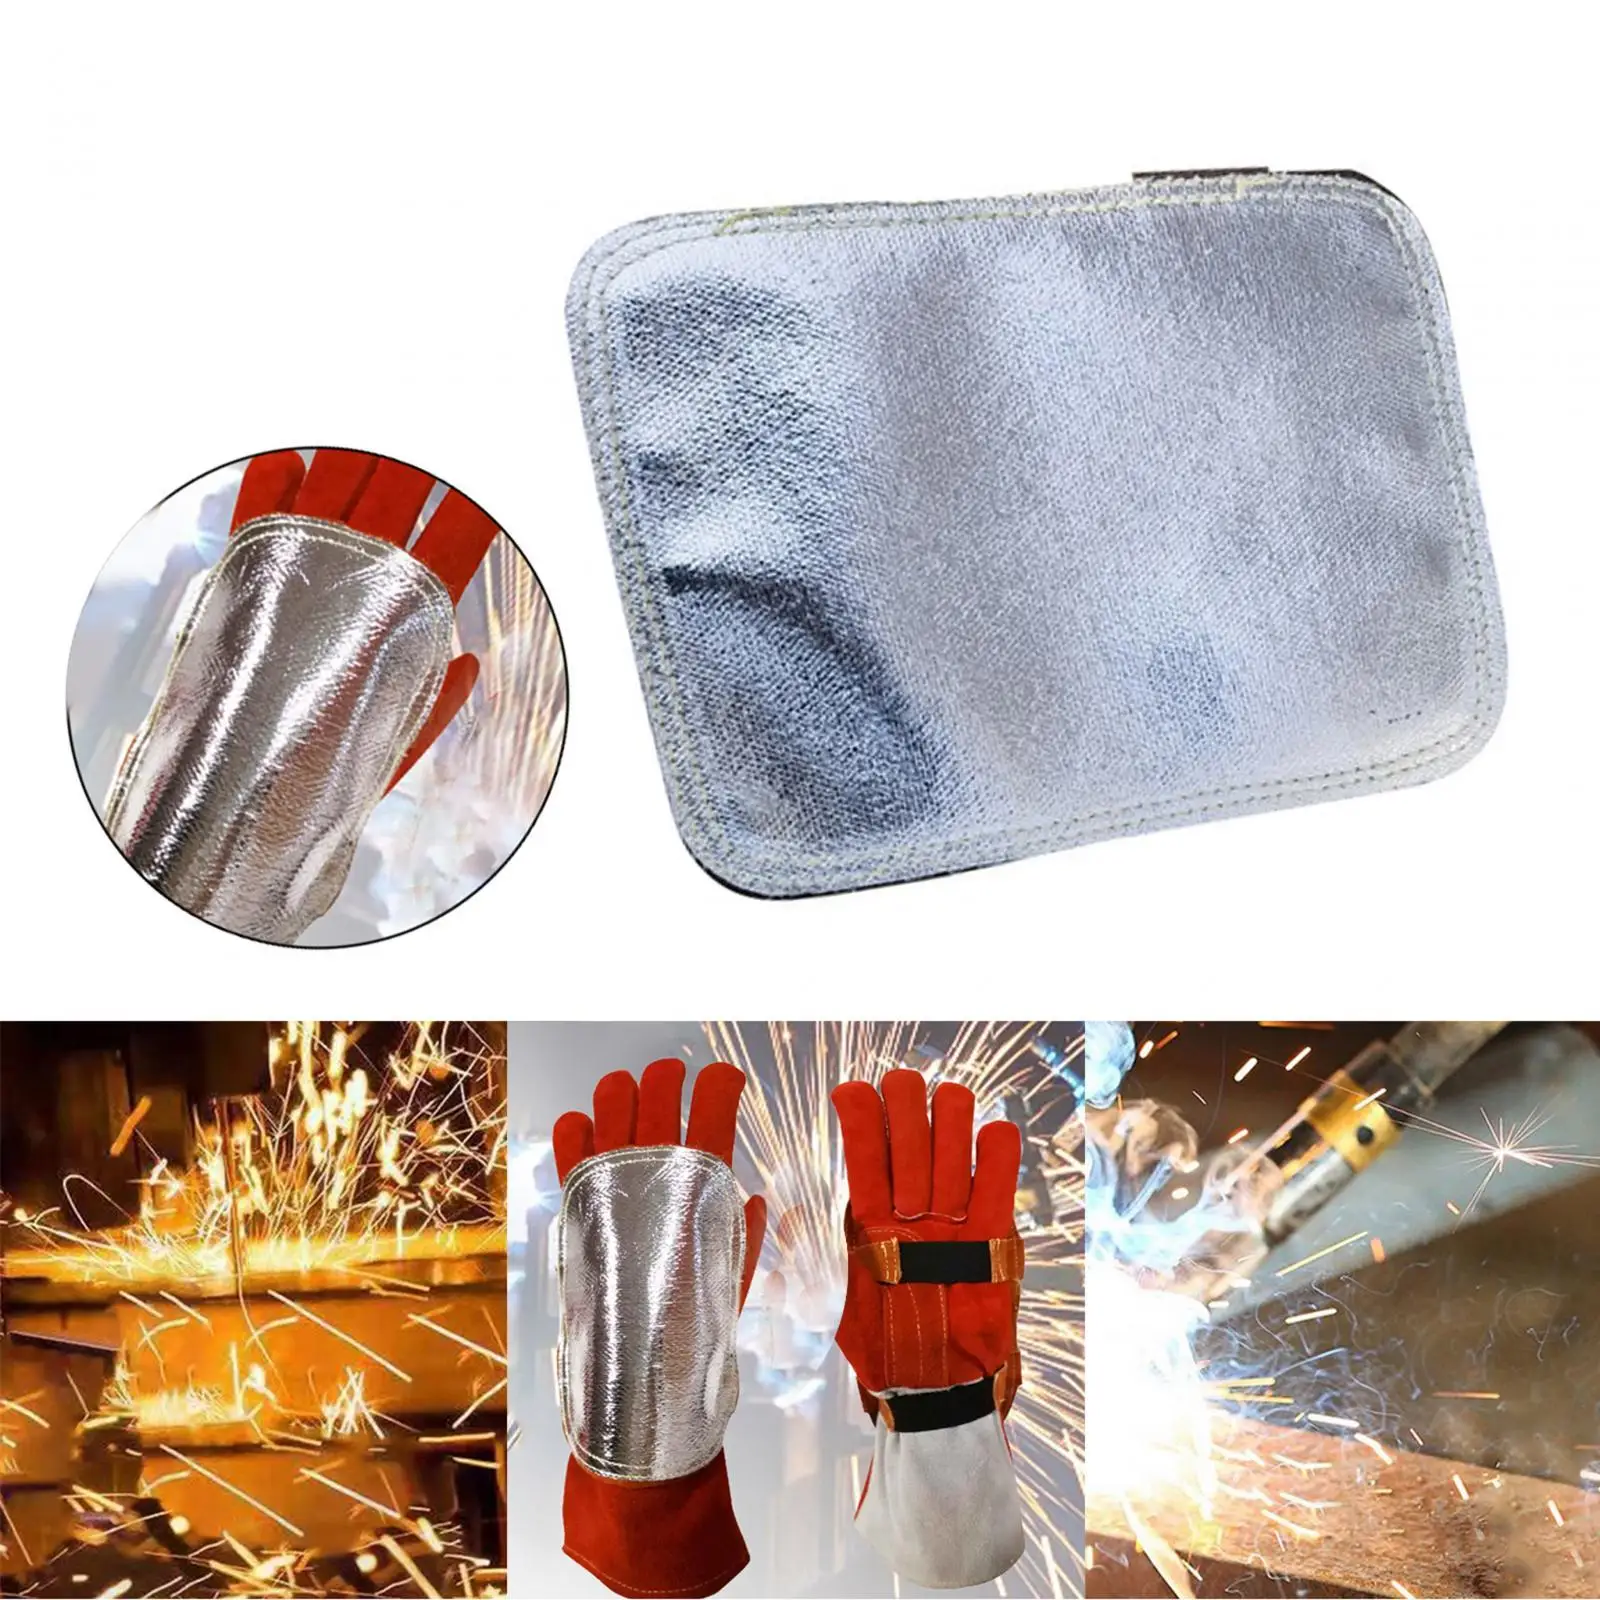 Leather Heat Shield High Temperature Resistant Welding Hands Shield for Welding Camping Cutting Metal Smelting Industrial Boiler